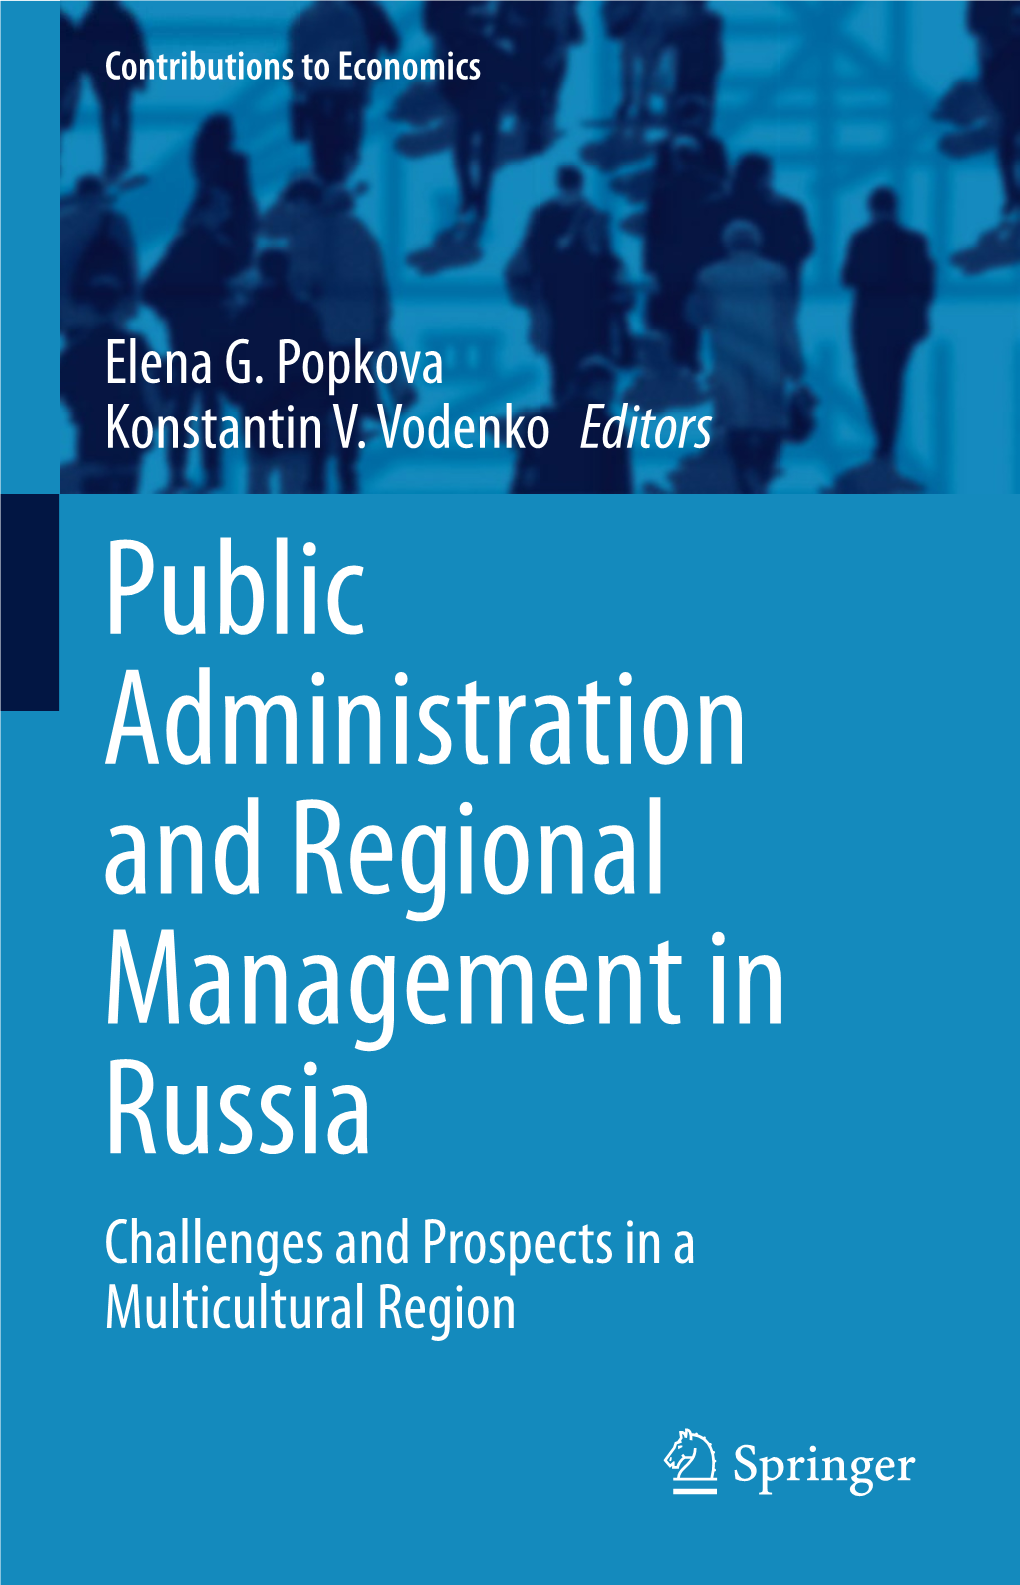 Public Administration and Regional Management in Russia Challenges and Prospects in a Multicultural Region